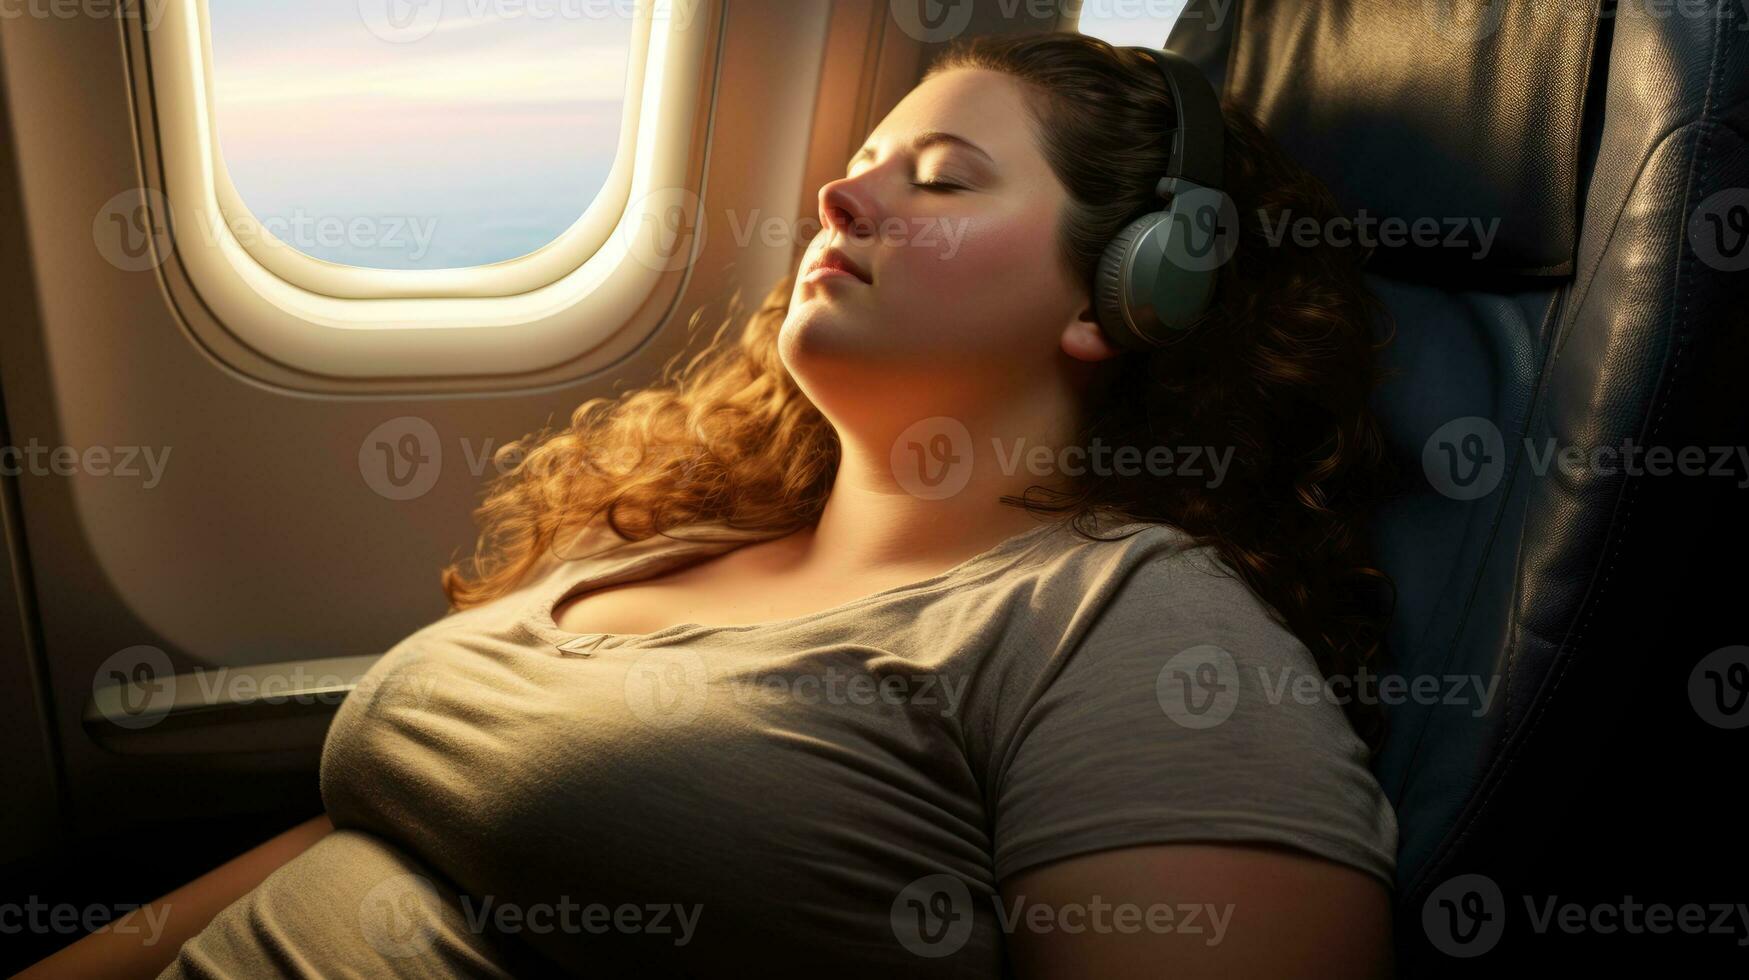 Plus size woman on an airplane. Overweight girl sleeping in an airplane seat photo